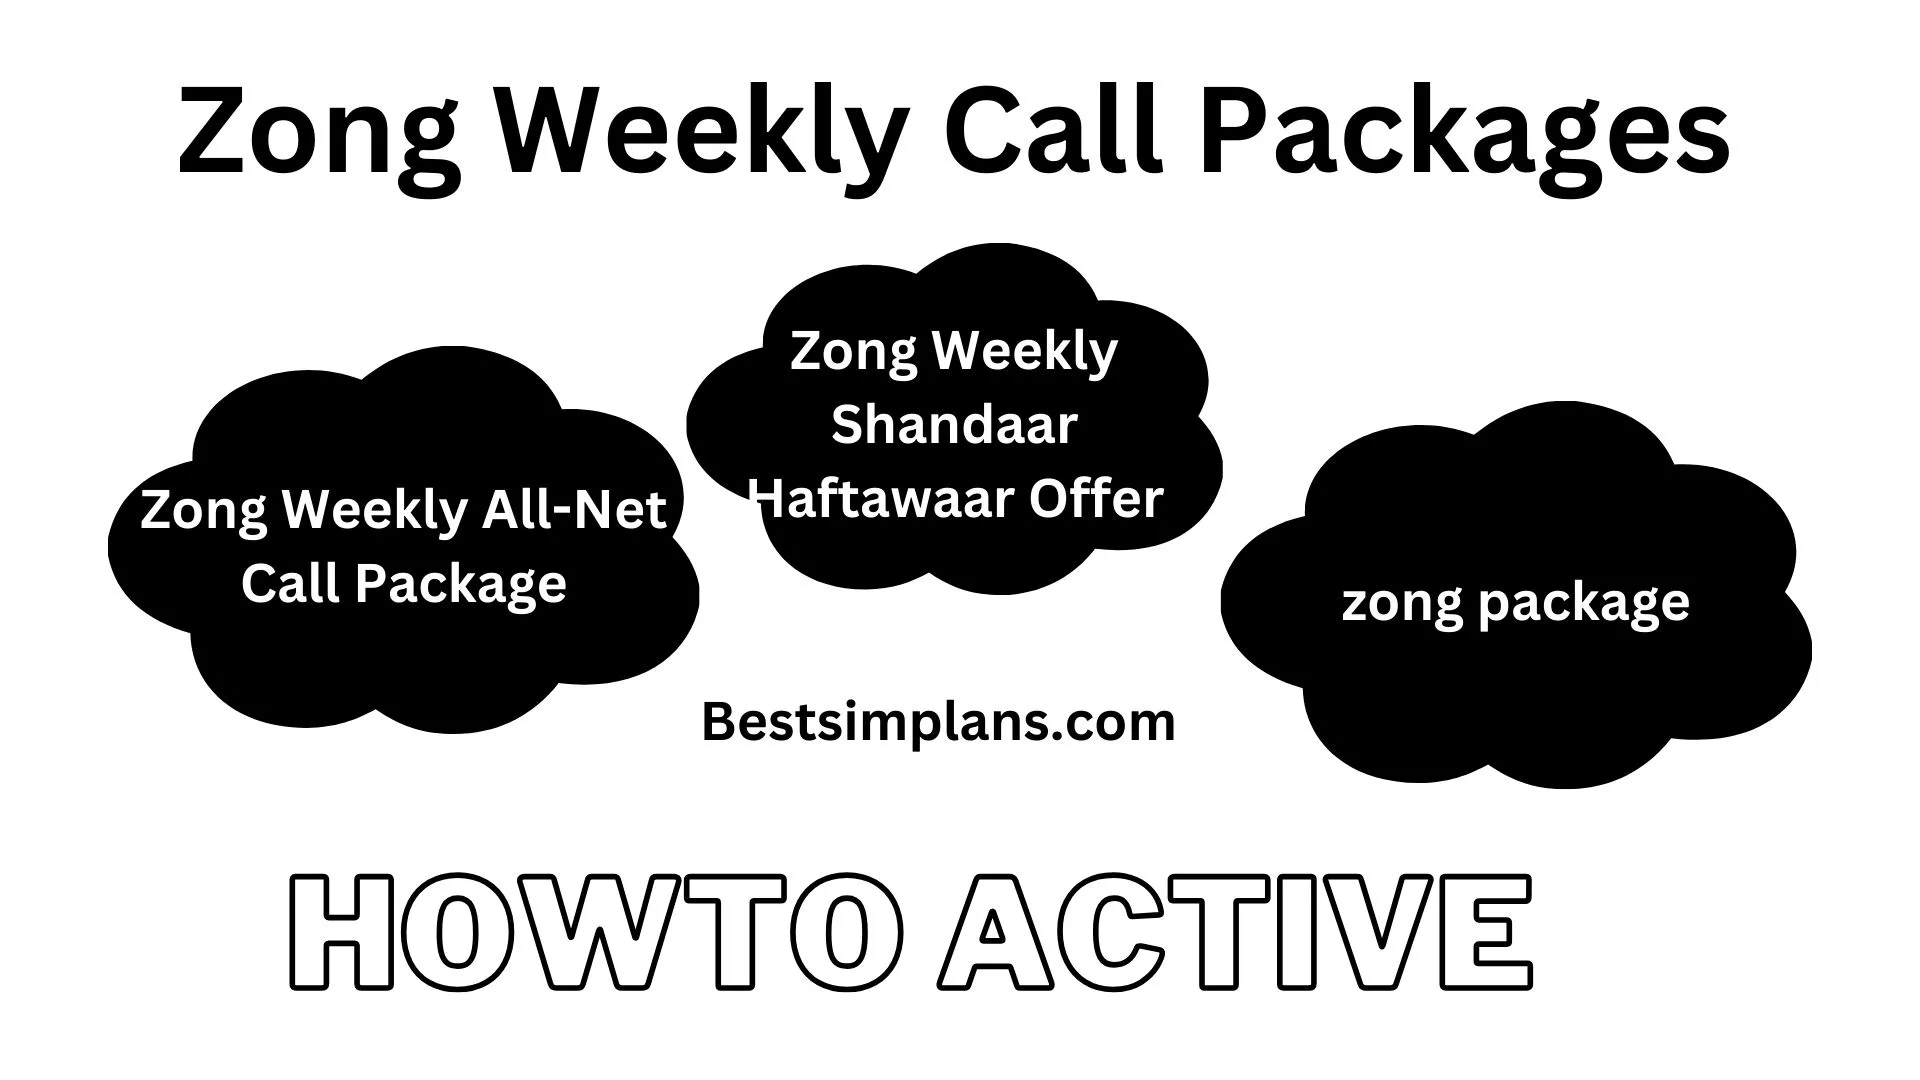 Zong Weekly Call Packages 7 Day